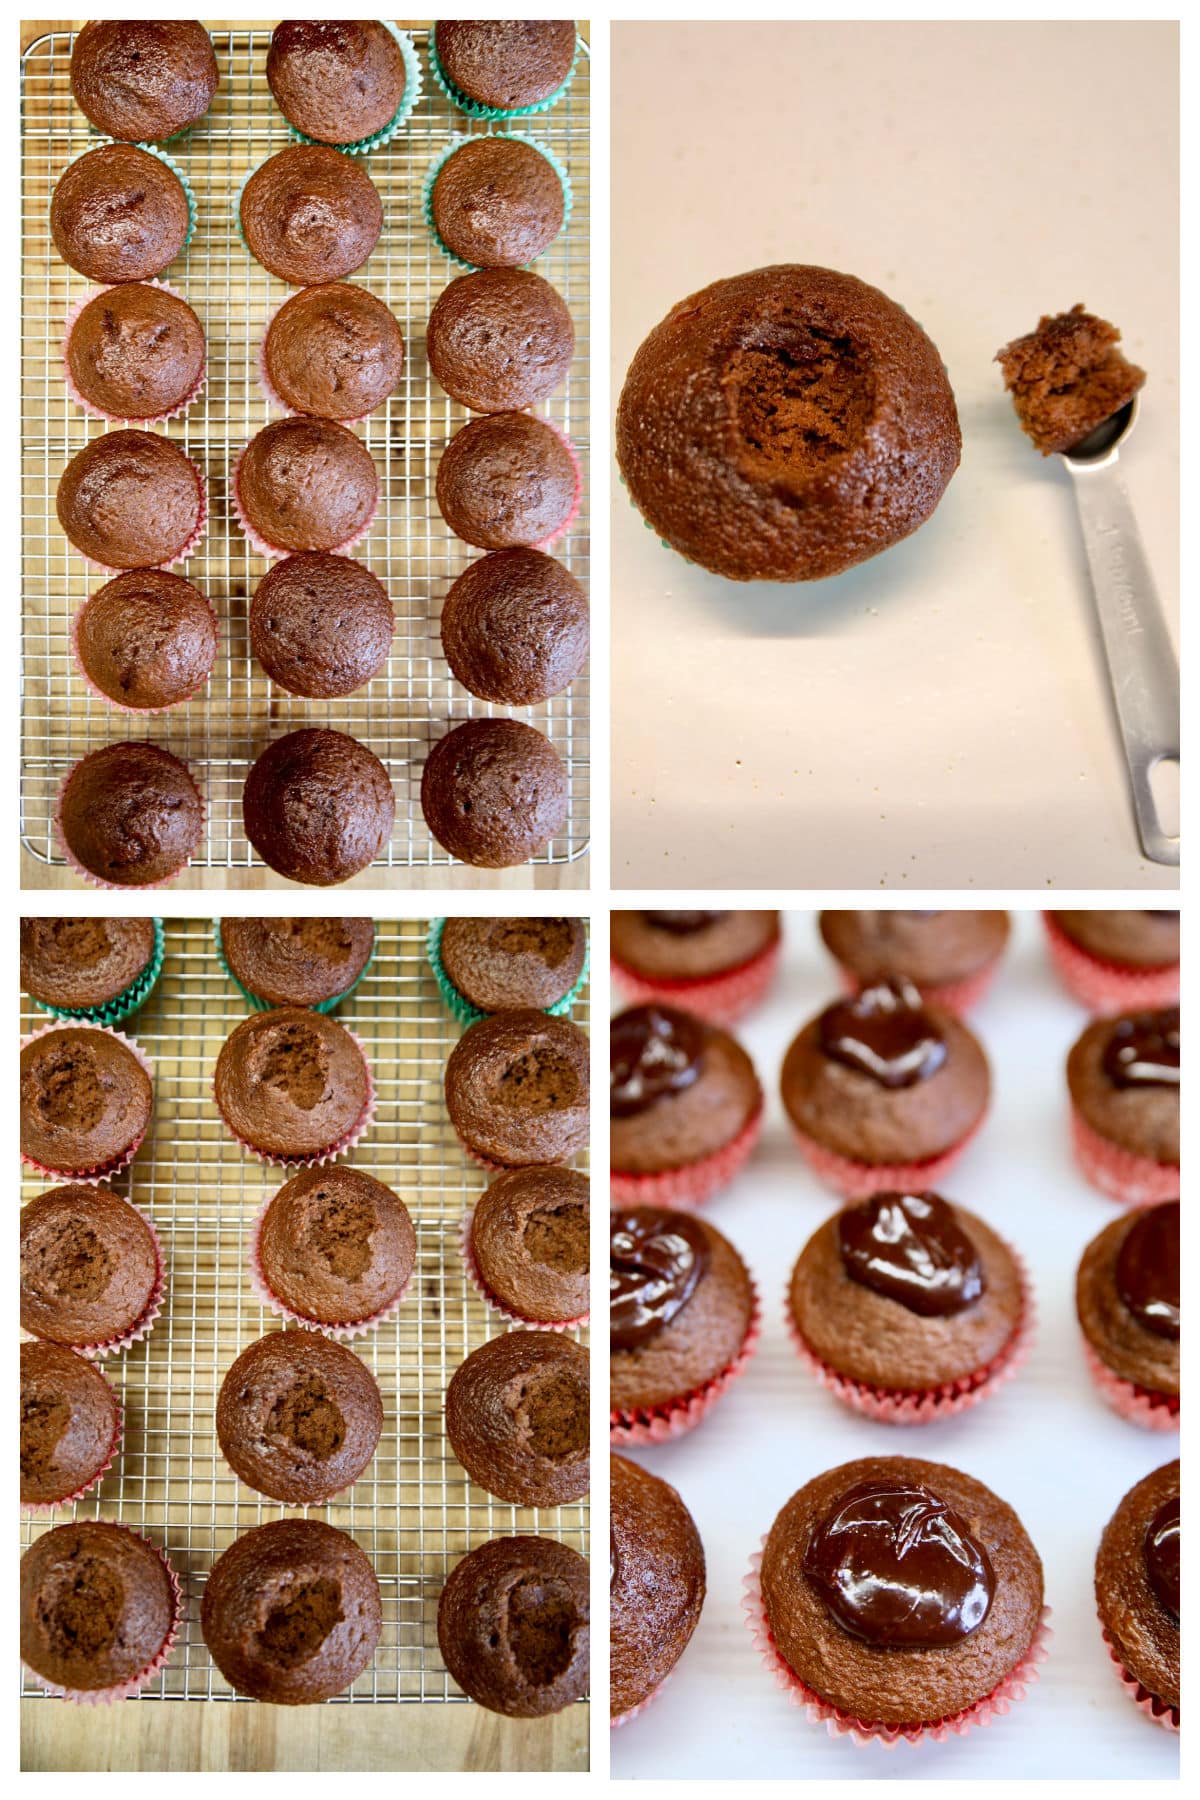 Filling chocolate cupcakes with ganache.